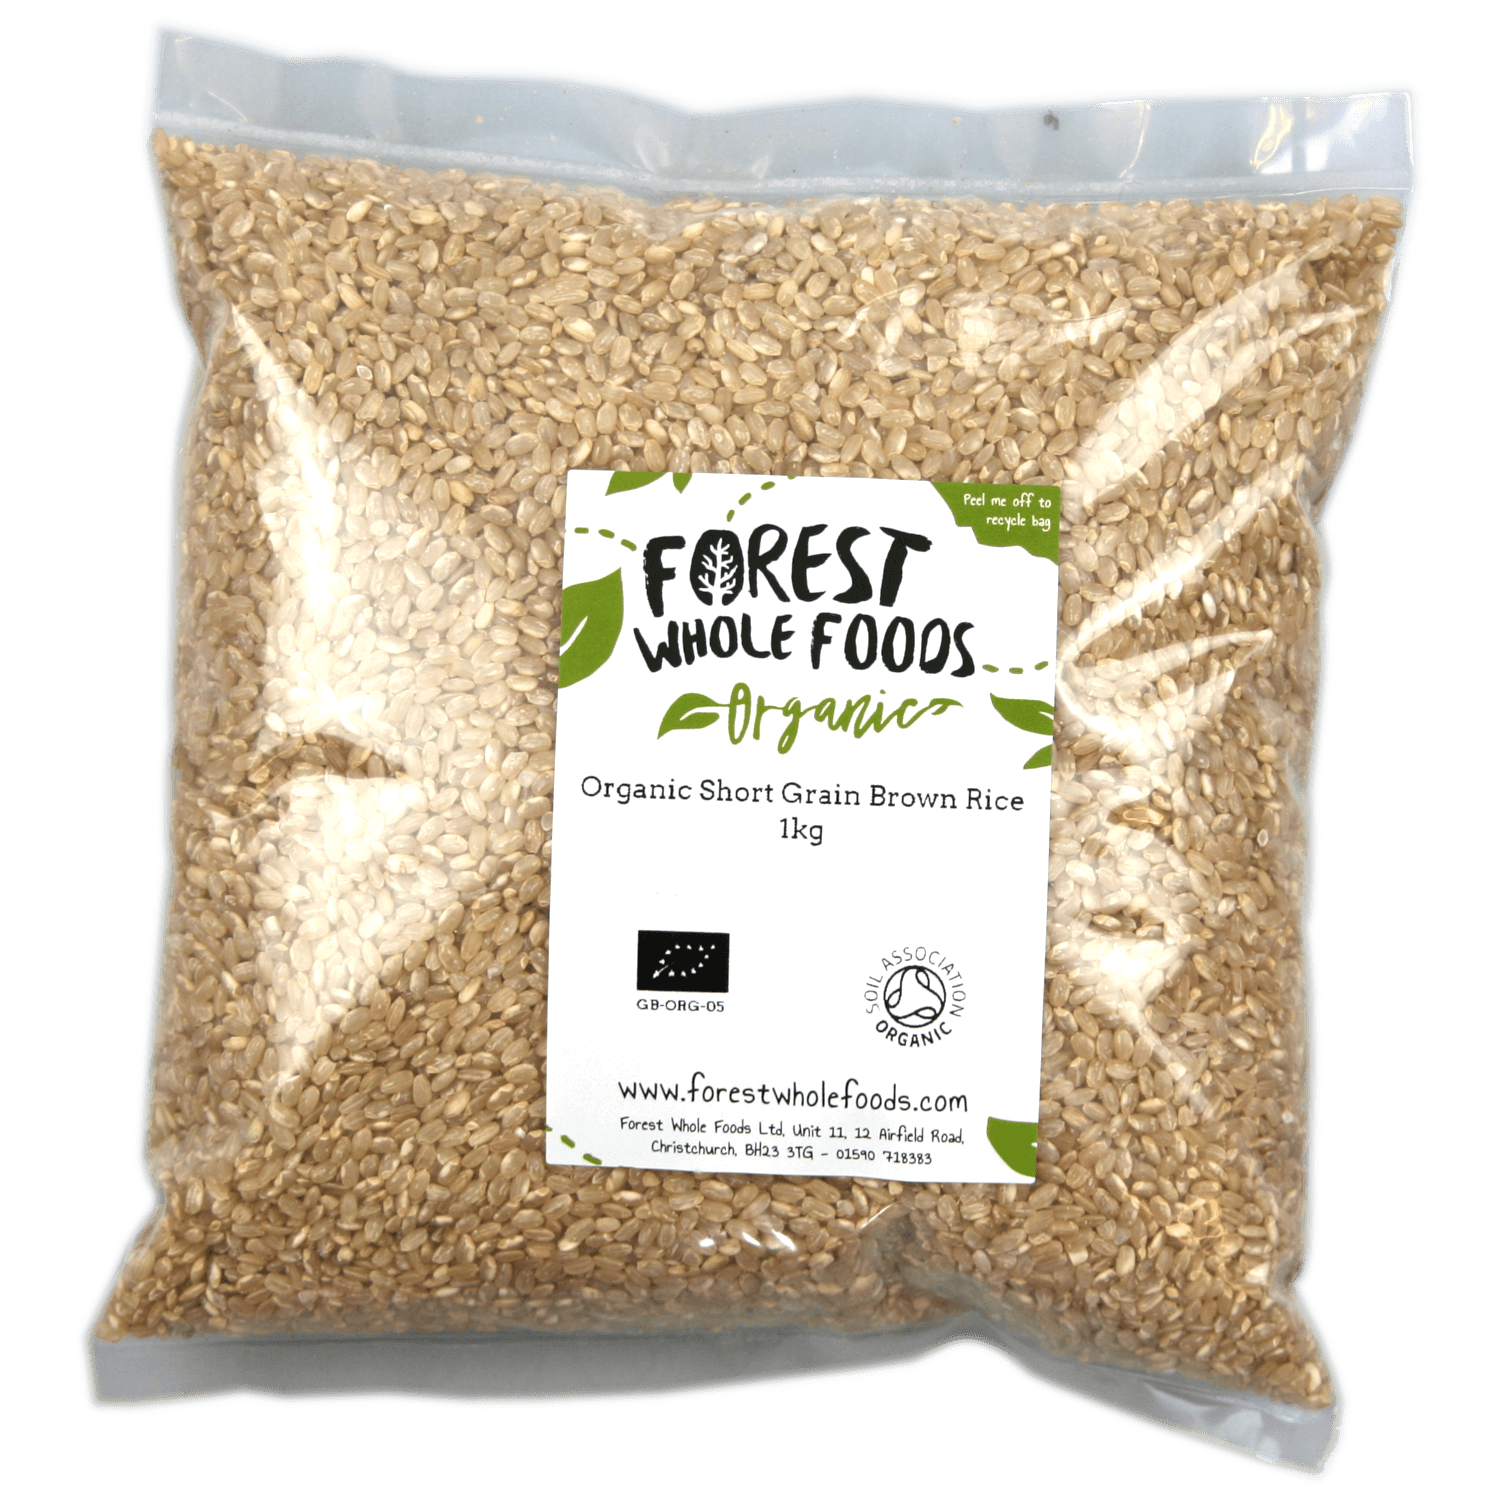 Organic Short Grain Brown Rice - Forest Whole Foods